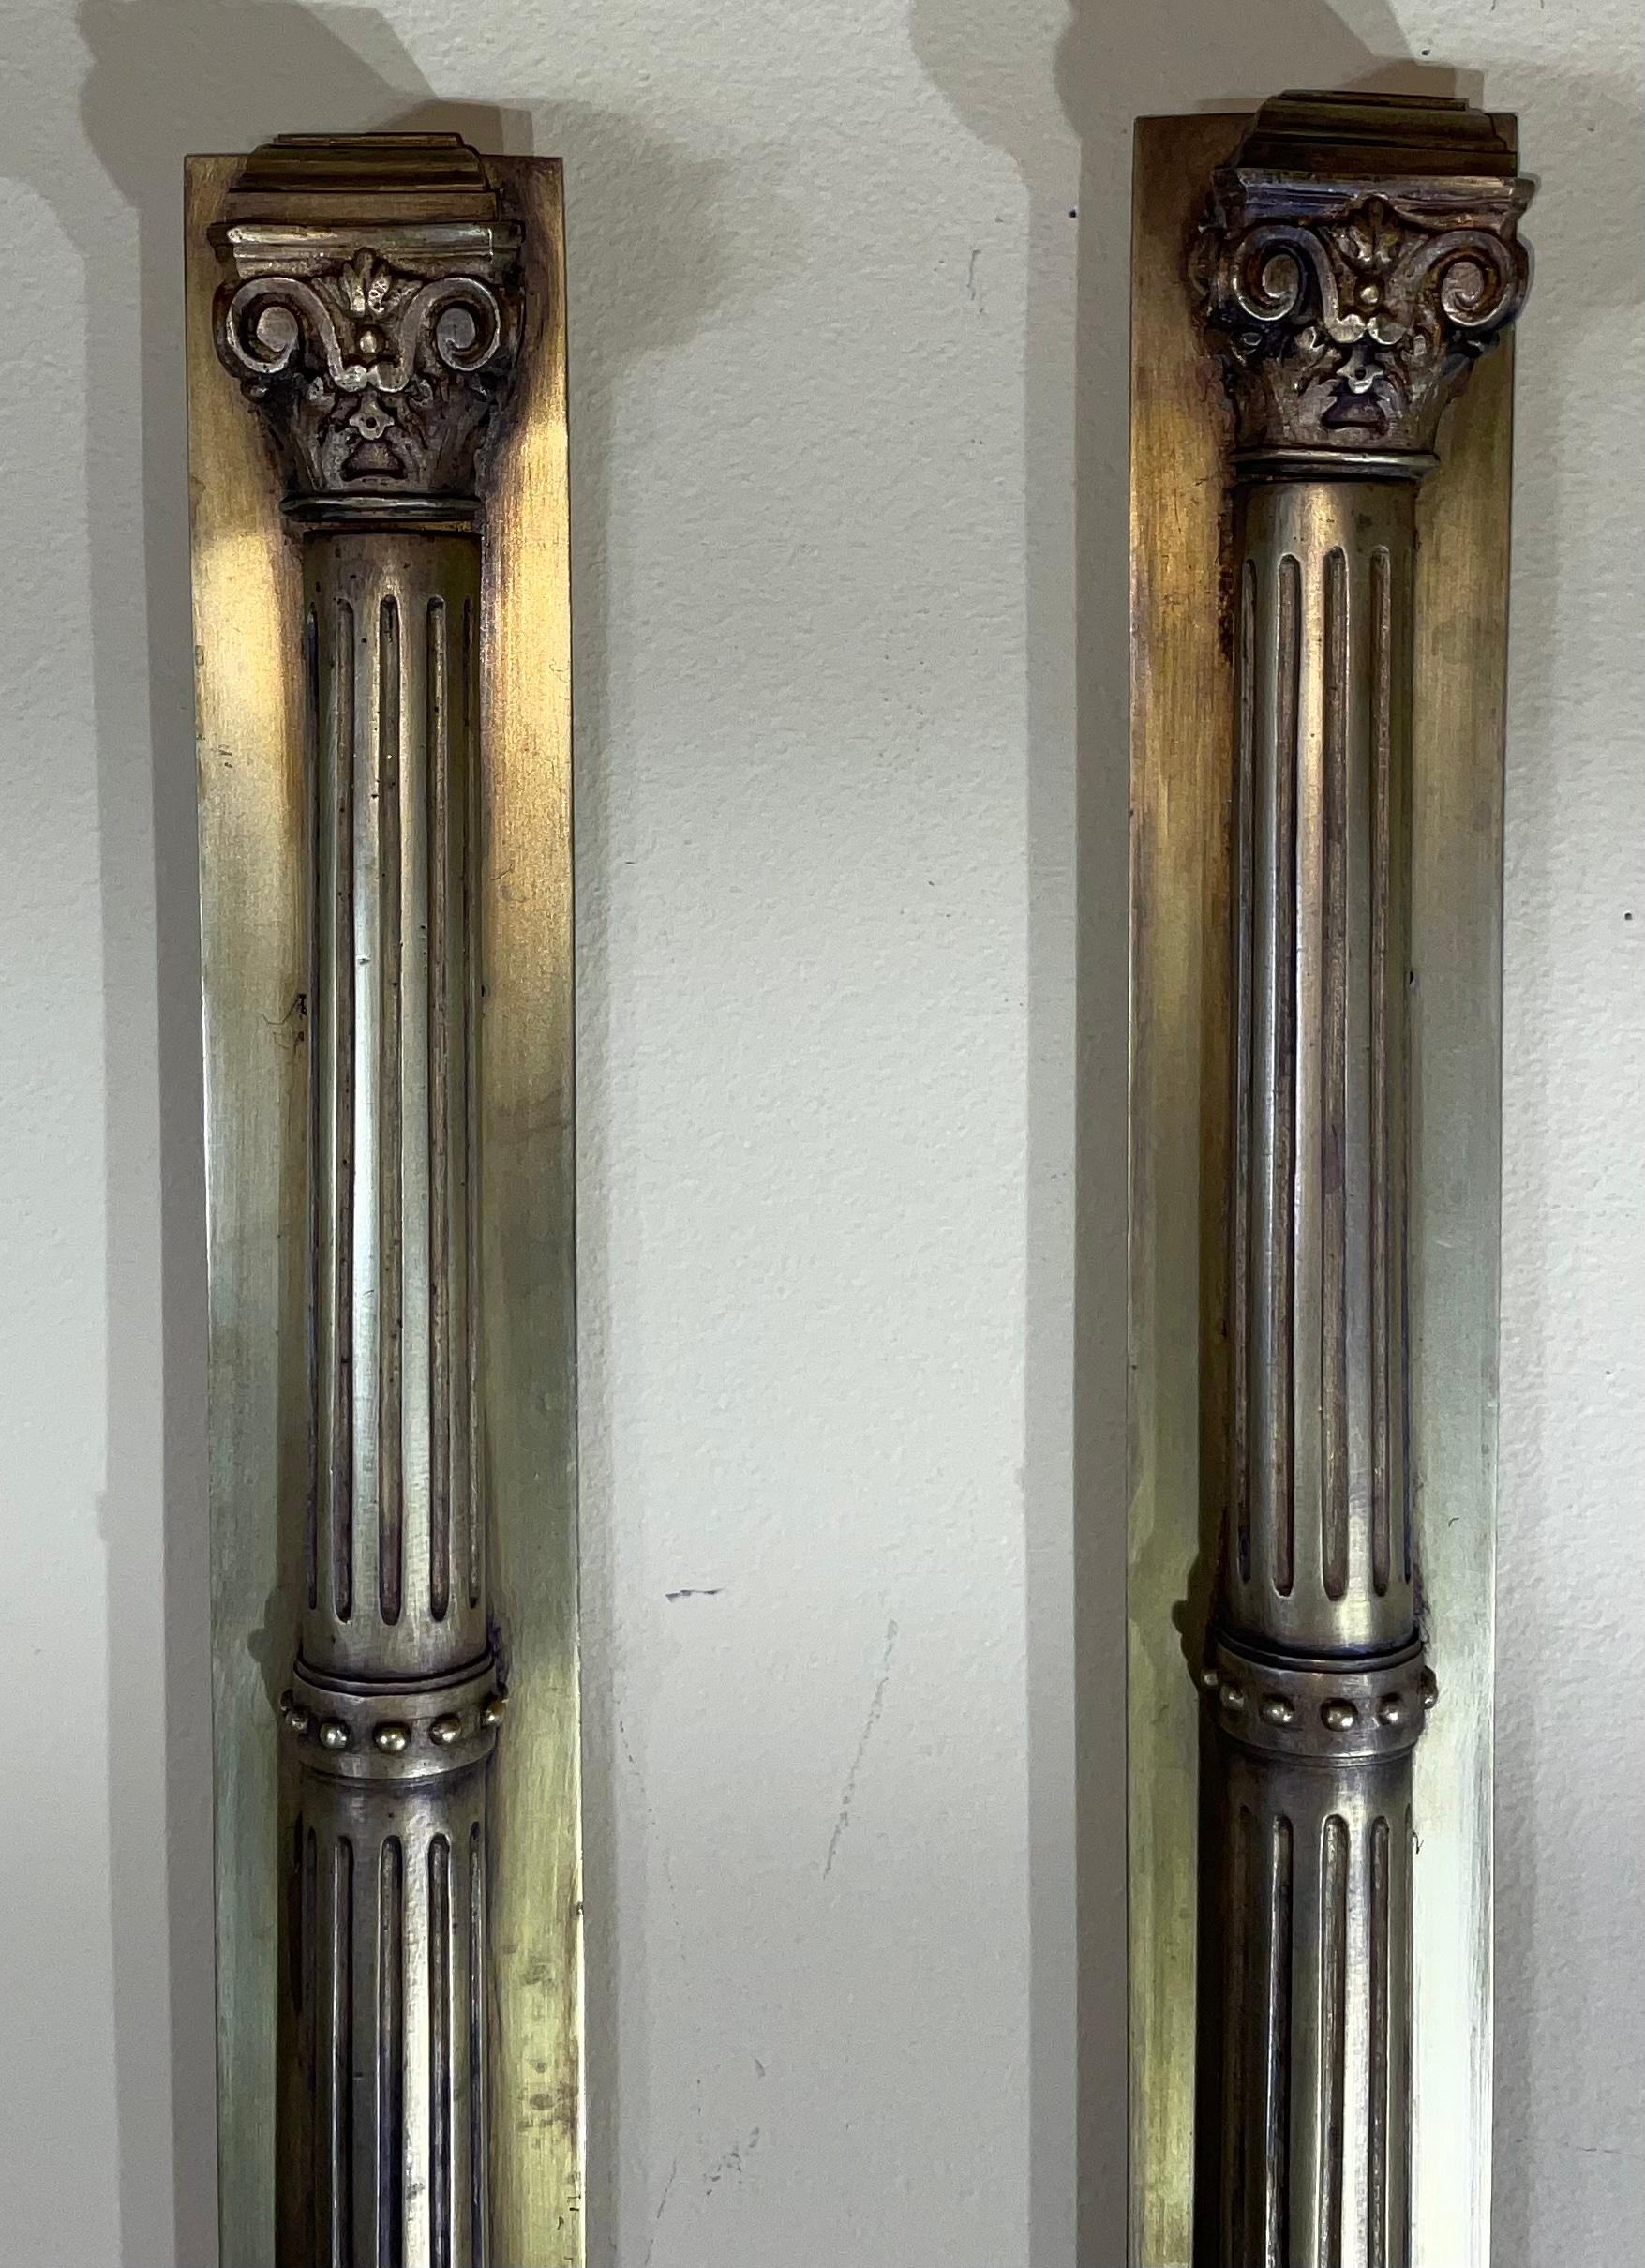 One of a kind wall hanging ornaments of Capital column made of solid brass and bronze originally part of 19th century Antiqe screen salvage. will make exceptional decorative wall hanging.
 